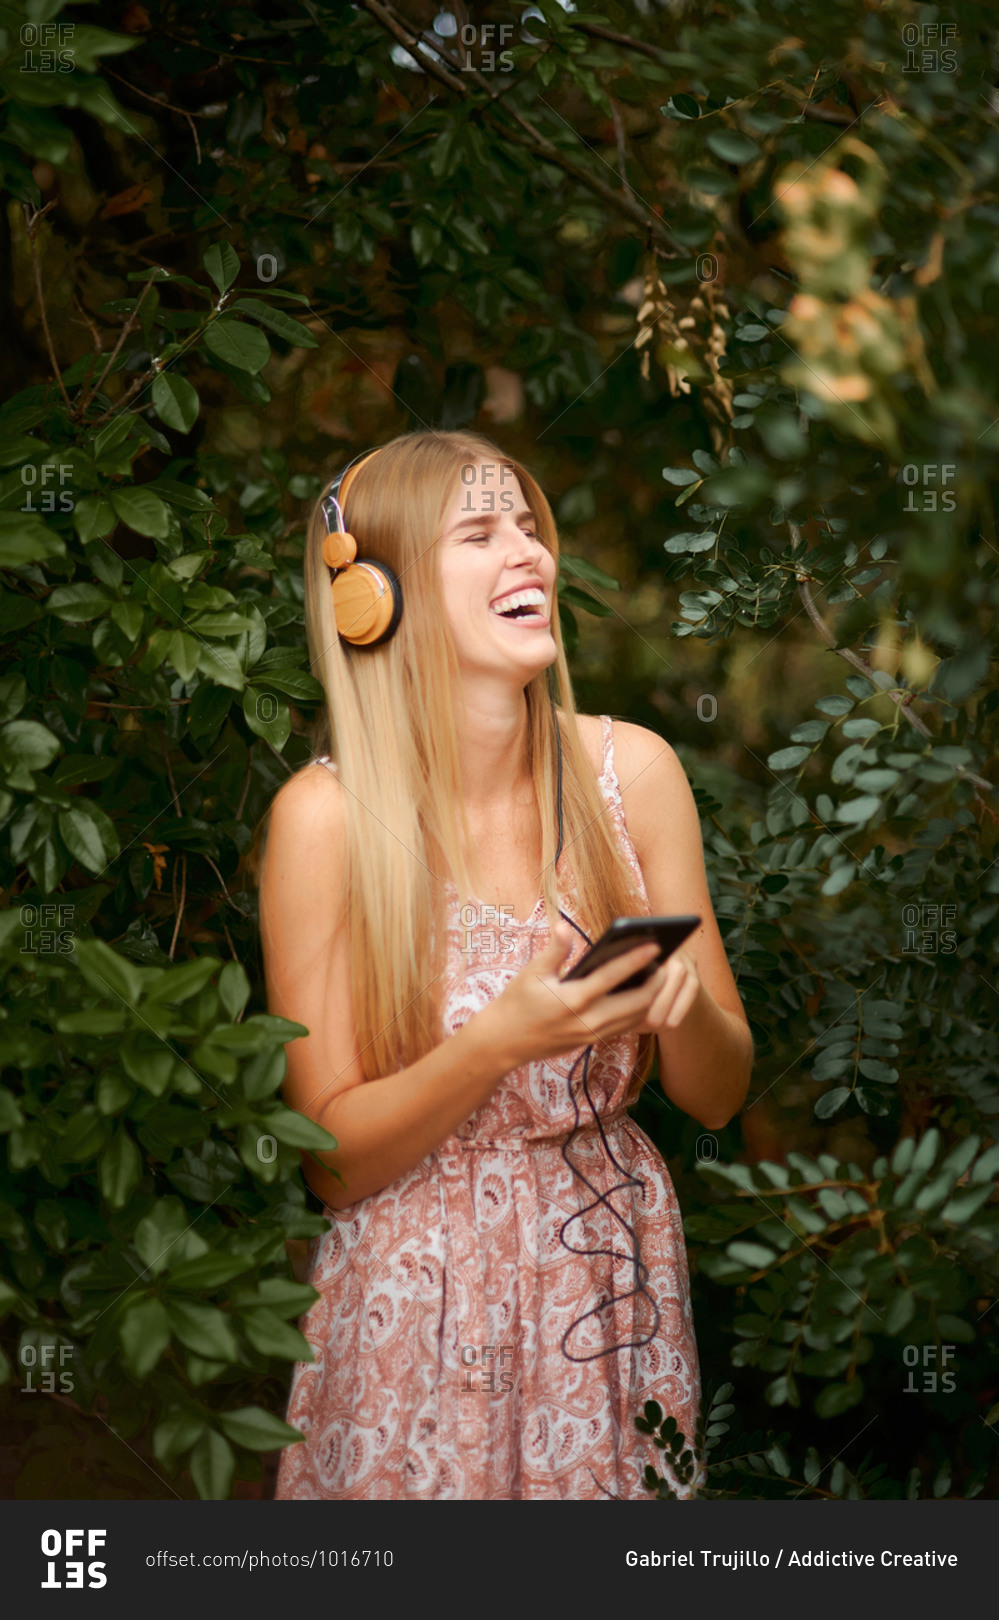 Cheerful young blond female in summer dress laughing happily while listening to music with smartphone and headphones among green foliage in garden